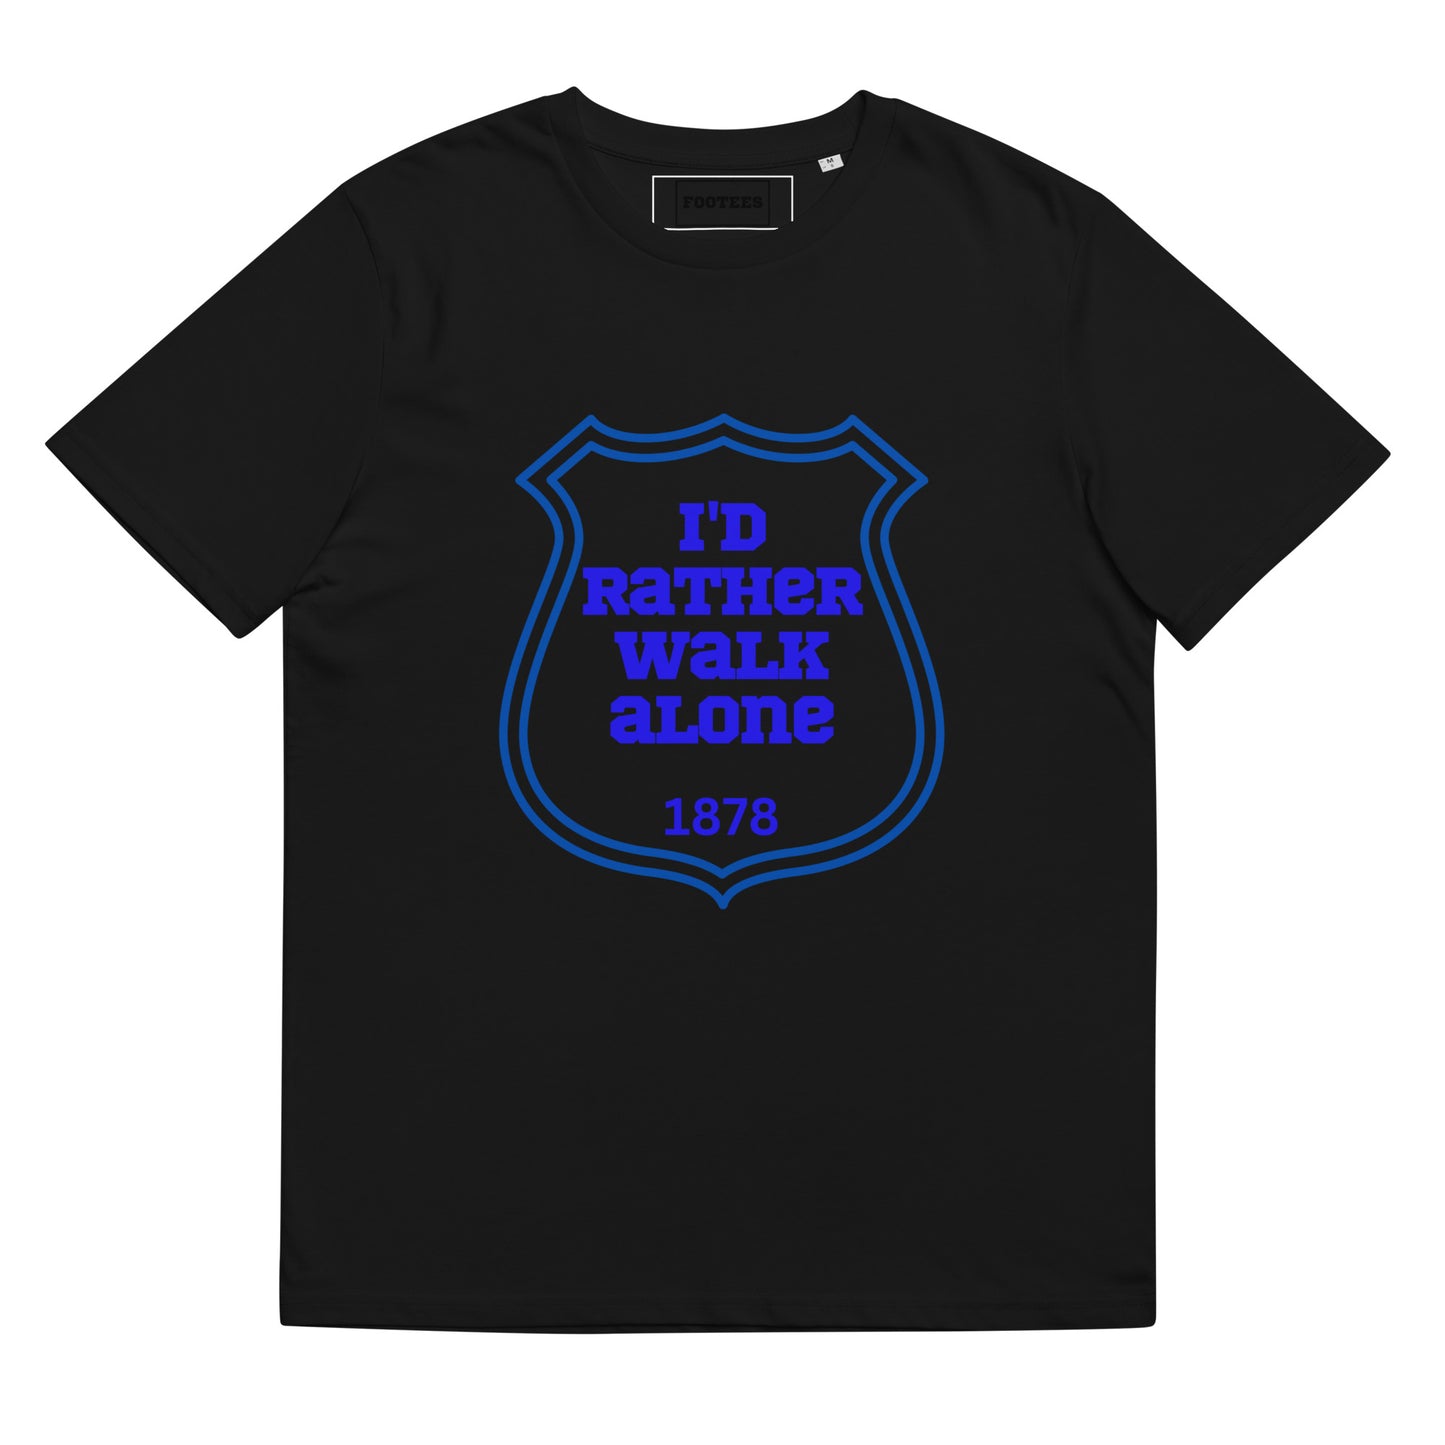 I'd rather walk alone Tee